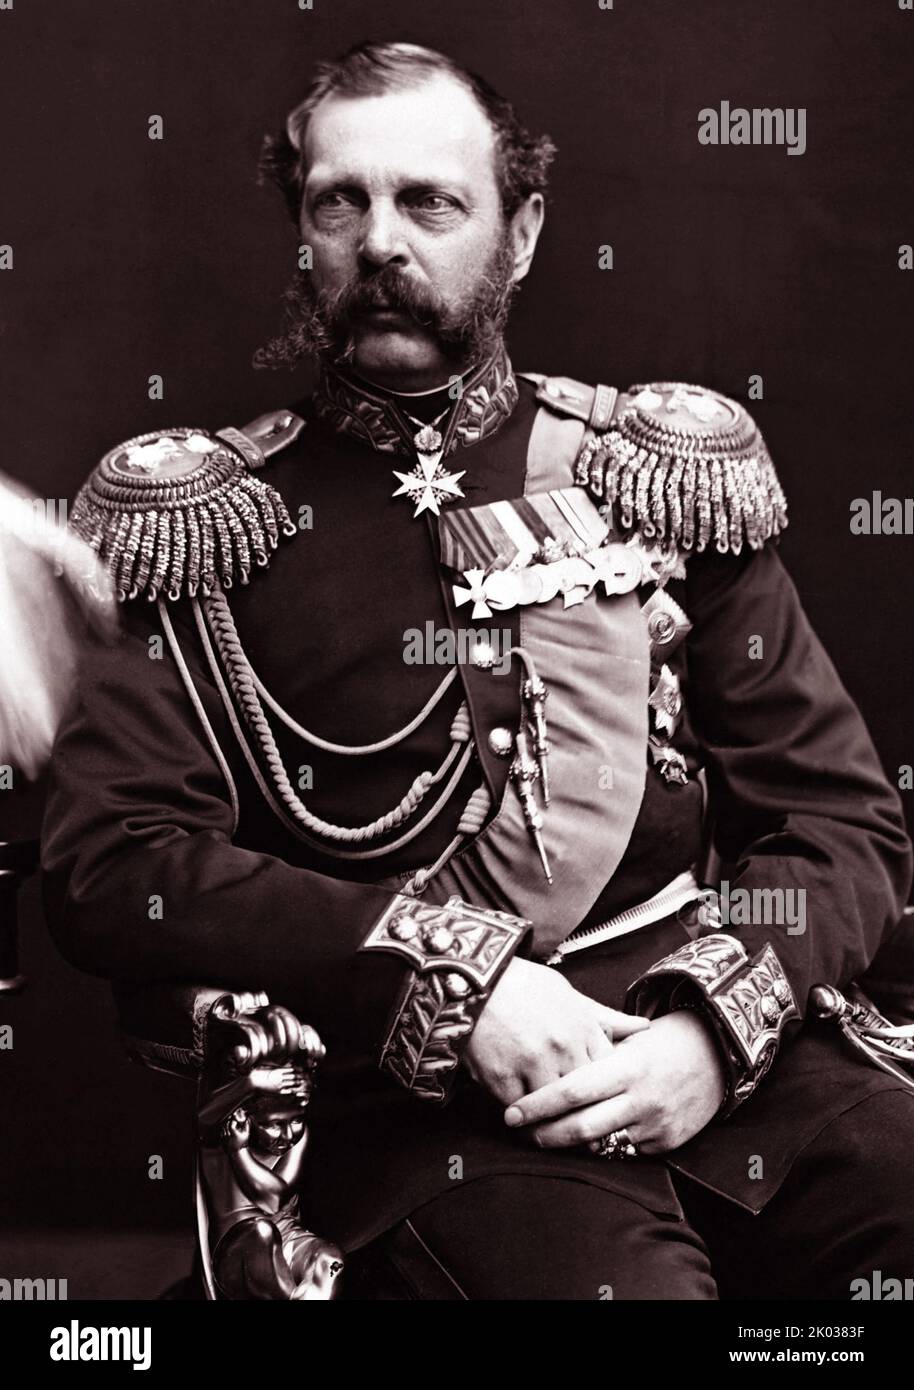 Alexander II (1818 - 1881) Emperor of Russia, King of Poland and Grand Duke of Finland from 2 March 1855 until his assassination. Stock Photo